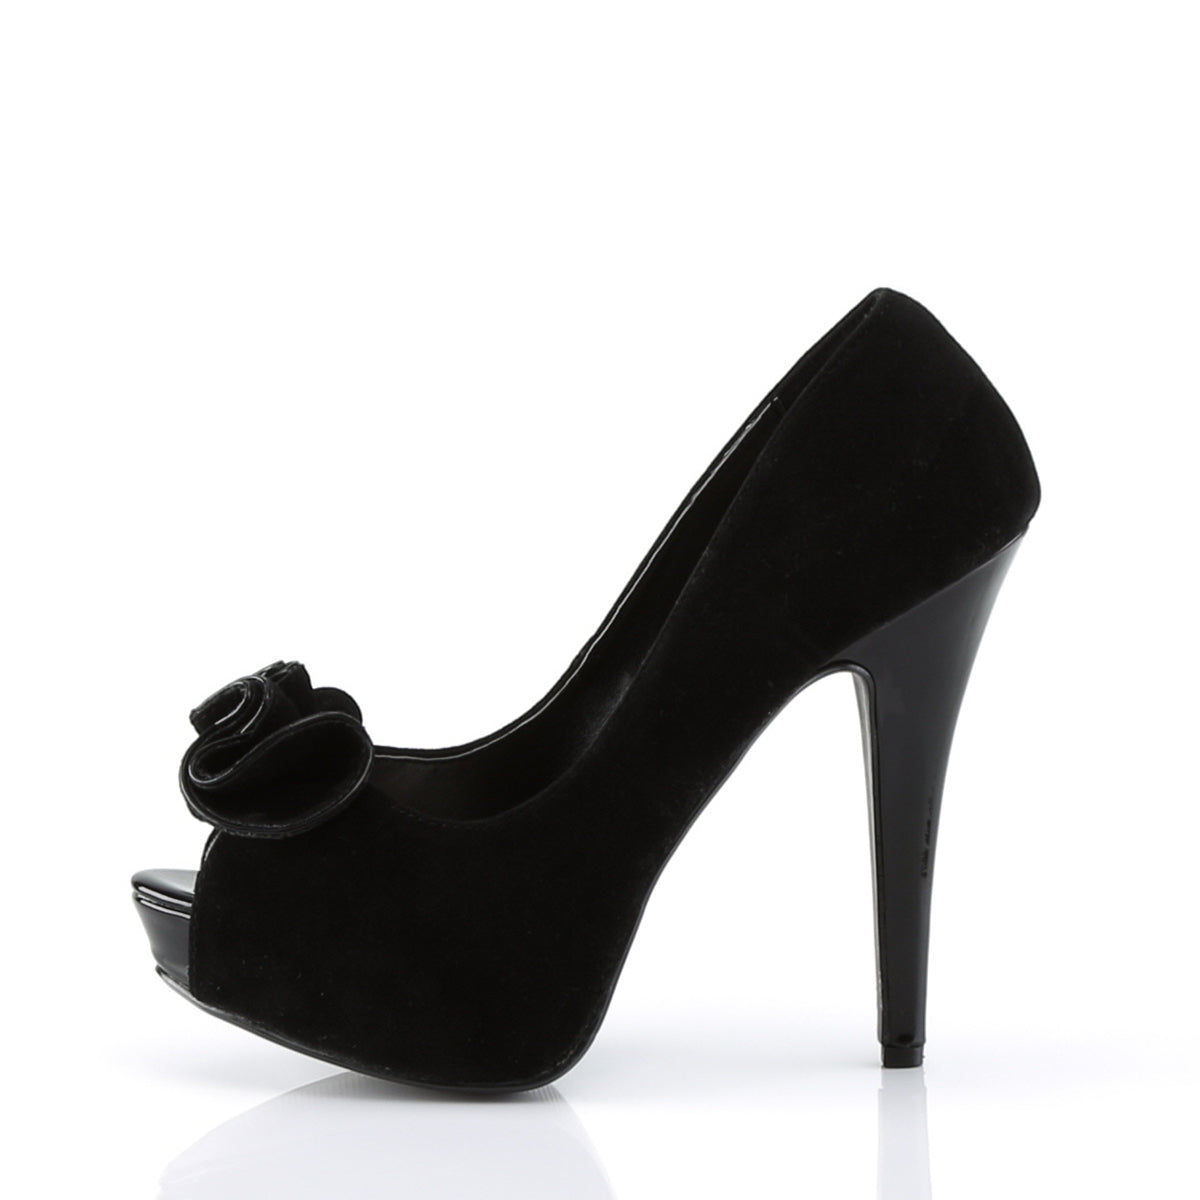 LOLITA-10 Pin Up 5" Heel Black Suede Pu Retro Pin Up Shoes-Pin Up Couture- Sexy Shoes Pole Dance Heels